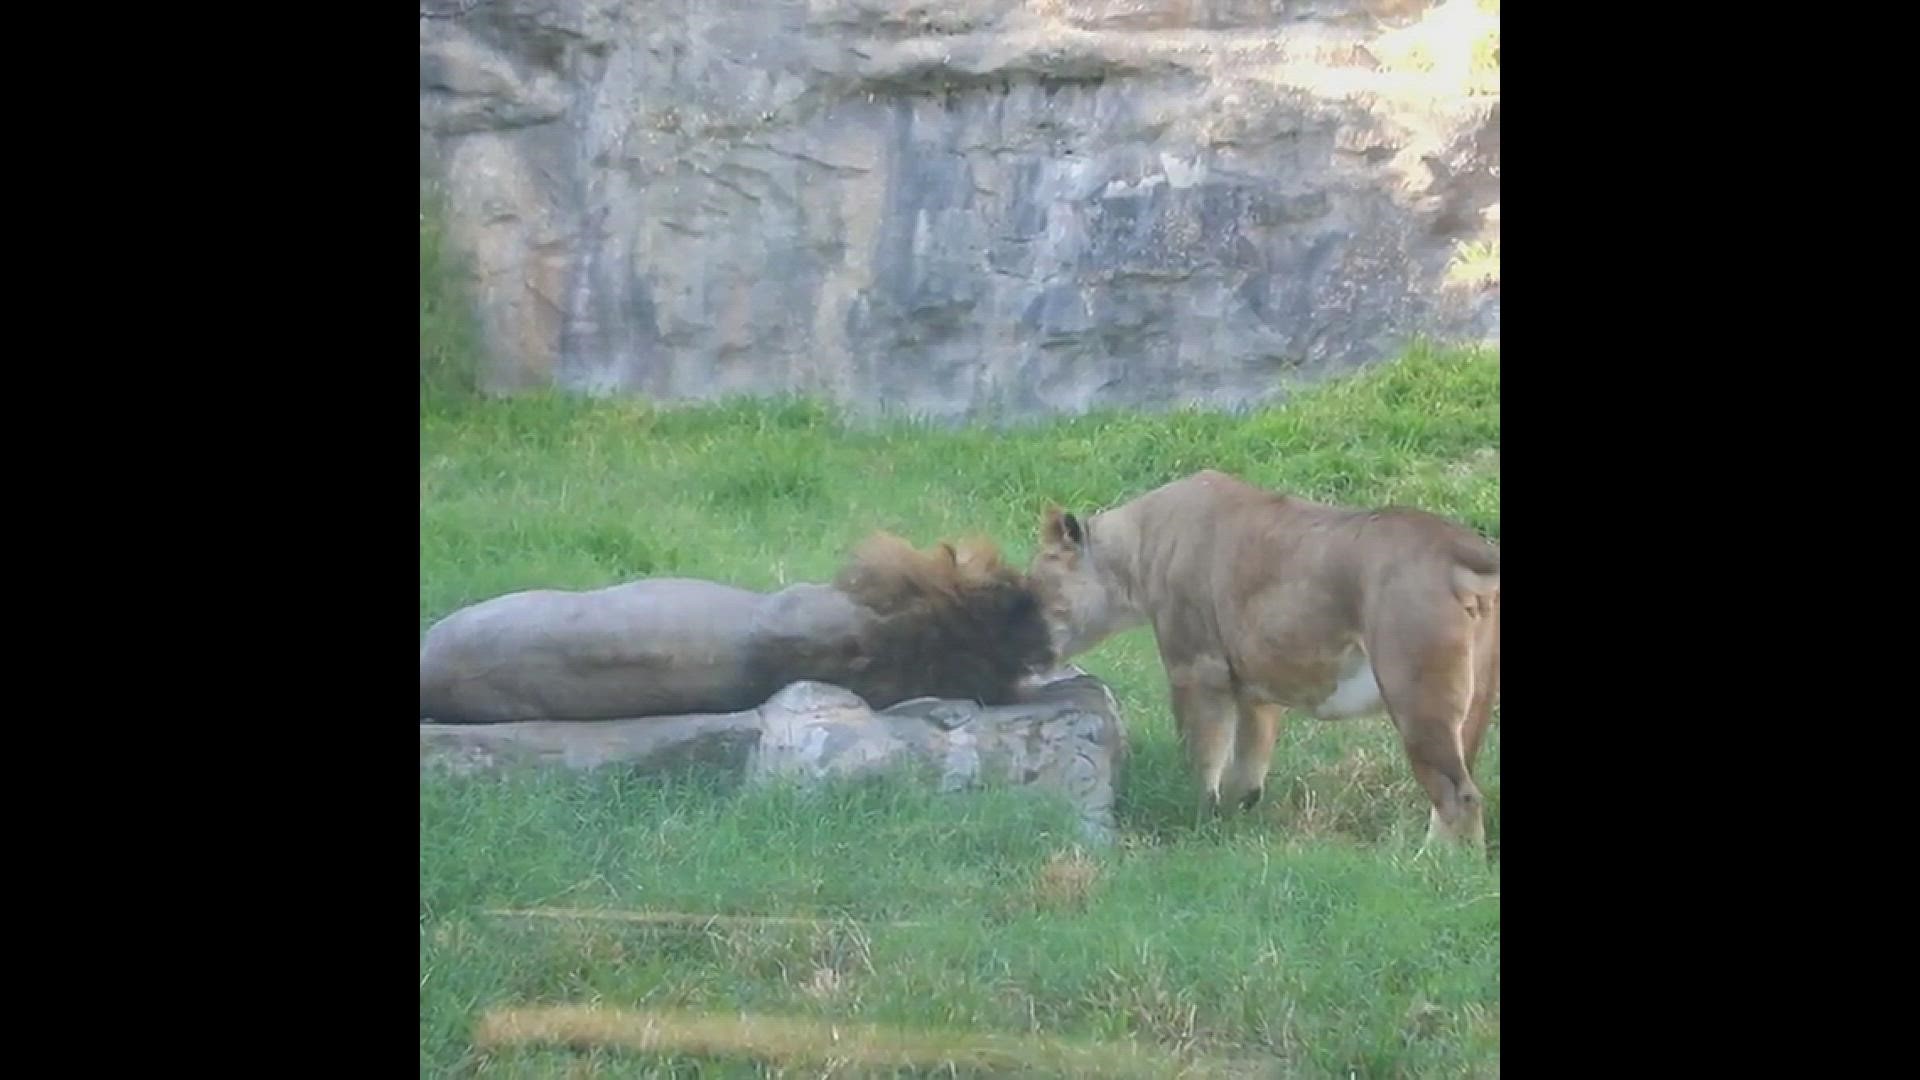 Rarabi Xxx Videos - Queen of the jungle! Even lions know when to compromise | kens5.com